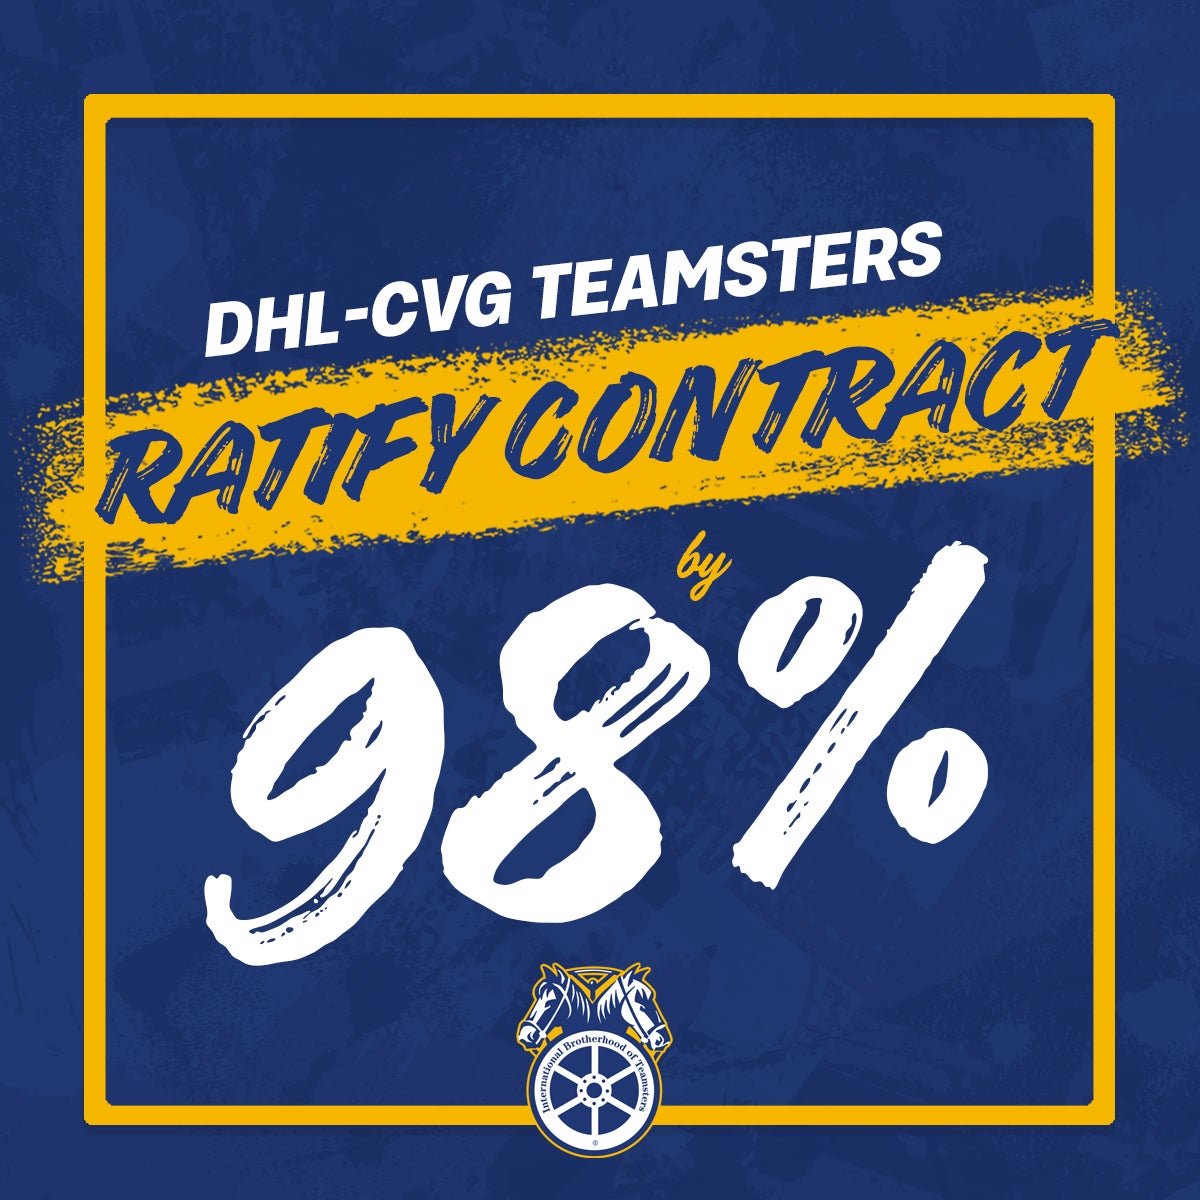 DHL-CVG Teamsters Ratify Contract by 98% - International Brotherhood of ...